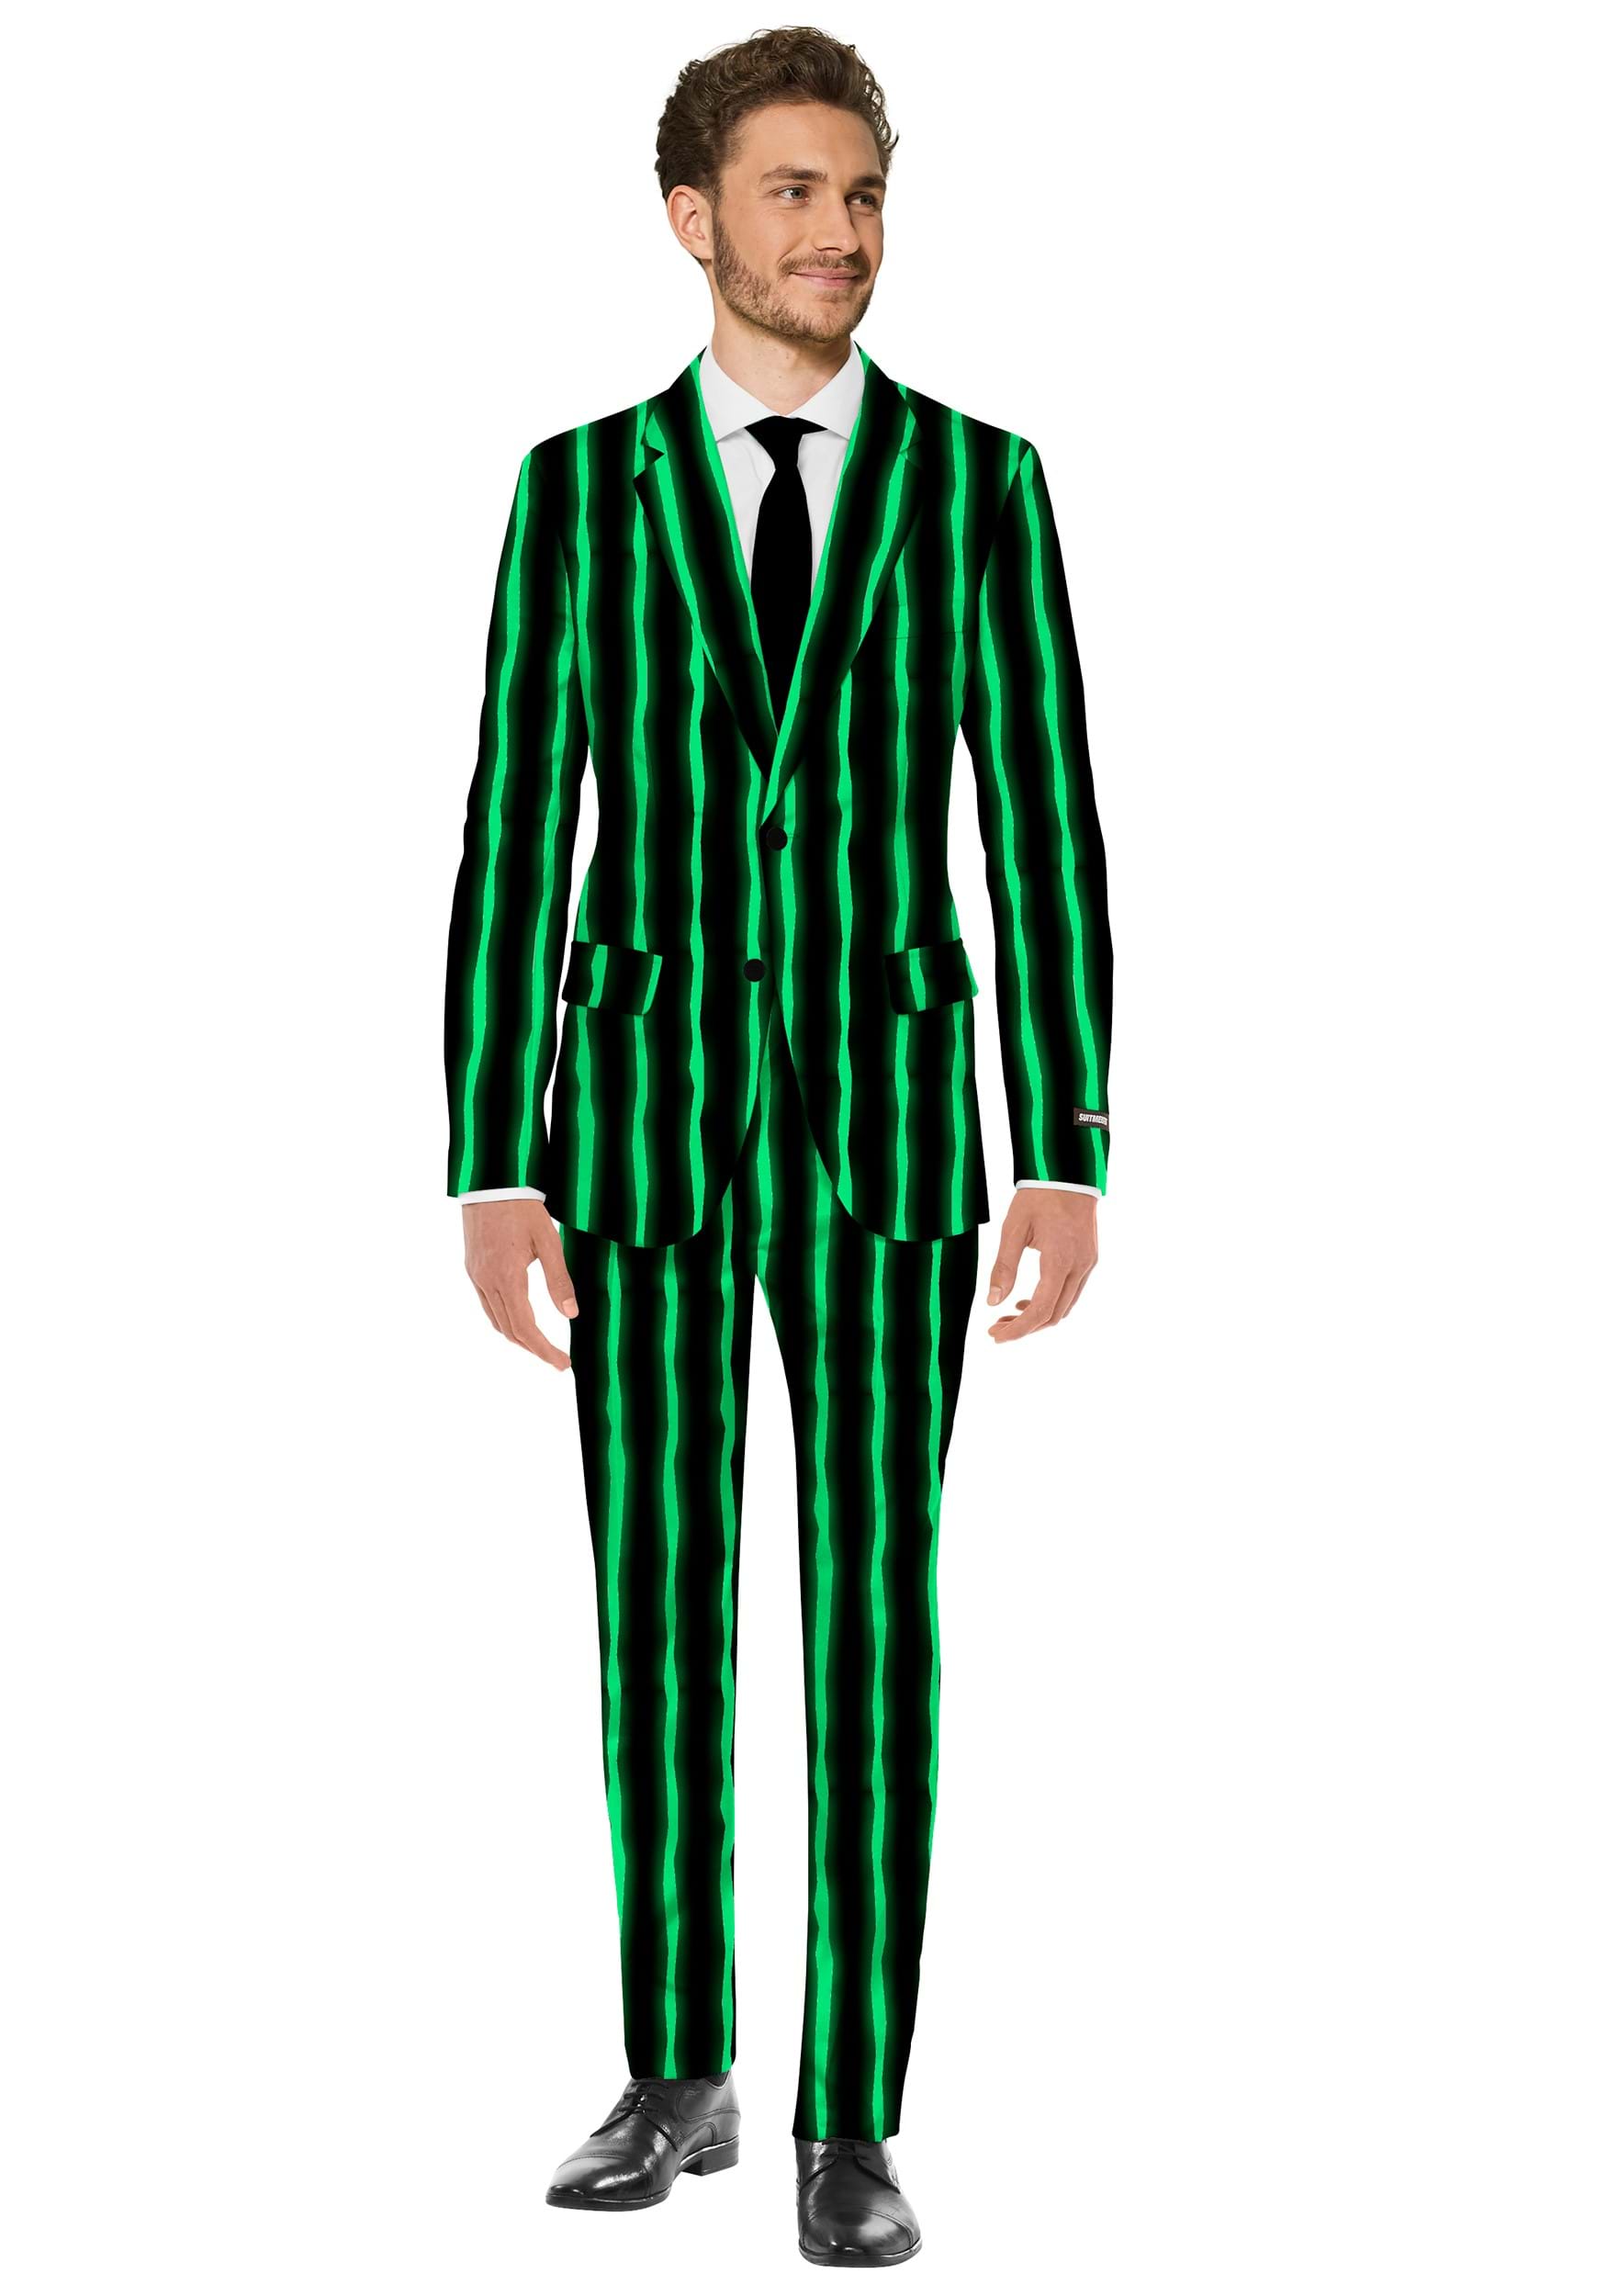 https://images.halloweencostumes.com/products/74095/1-1/suitmeister-oversized-glow-in-the-dark-pinstripe-black-suit.jpg